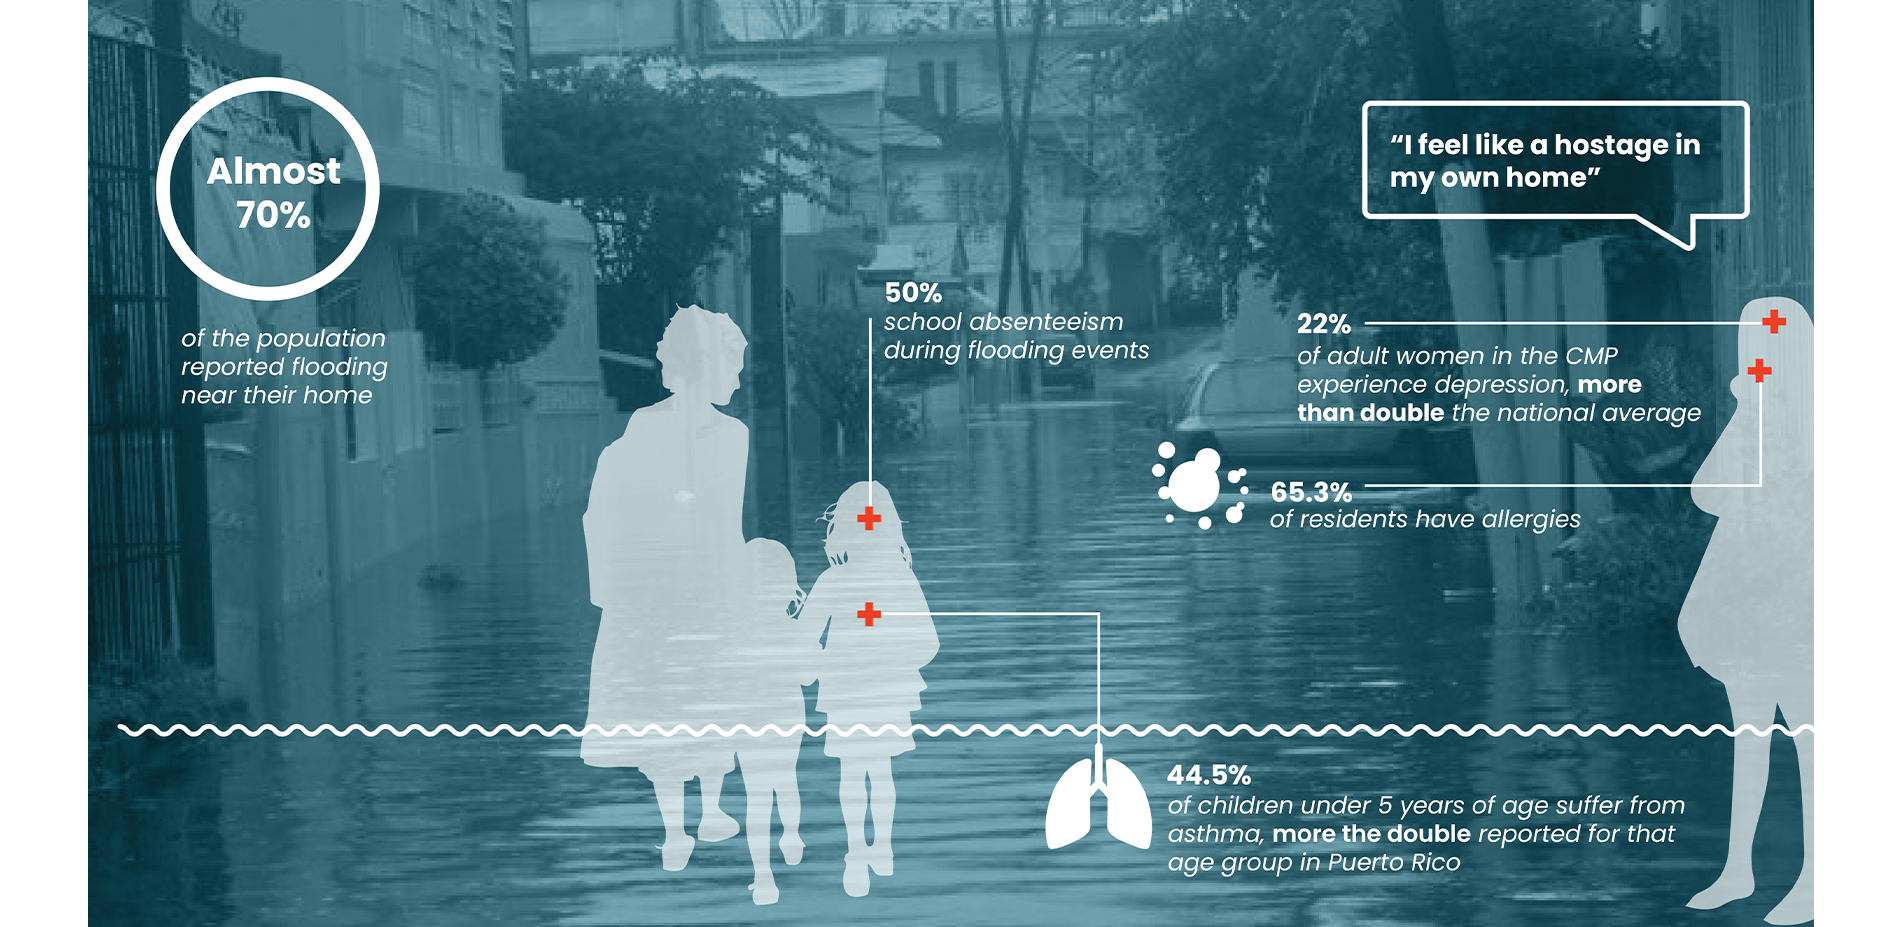 Community Health Impacts from Flooding in the Caño Martín Peña